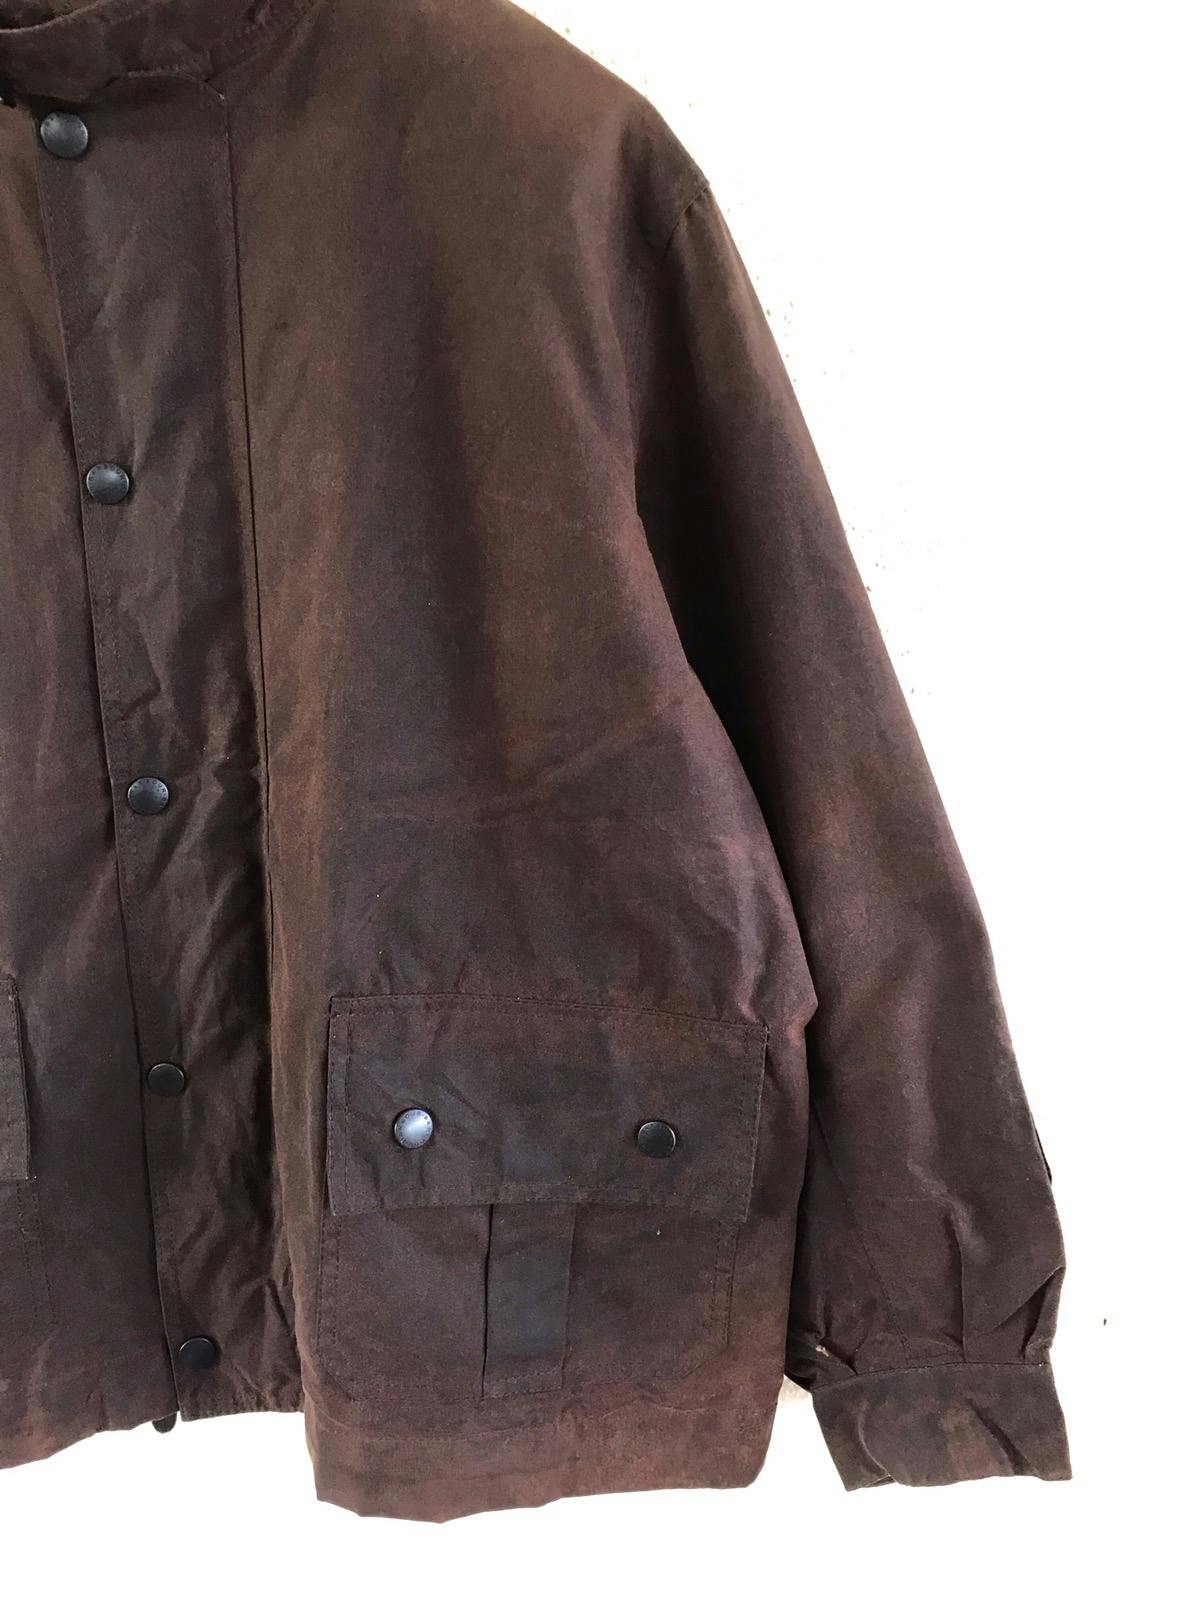 Barbour Wax Jacket Made in England - 6